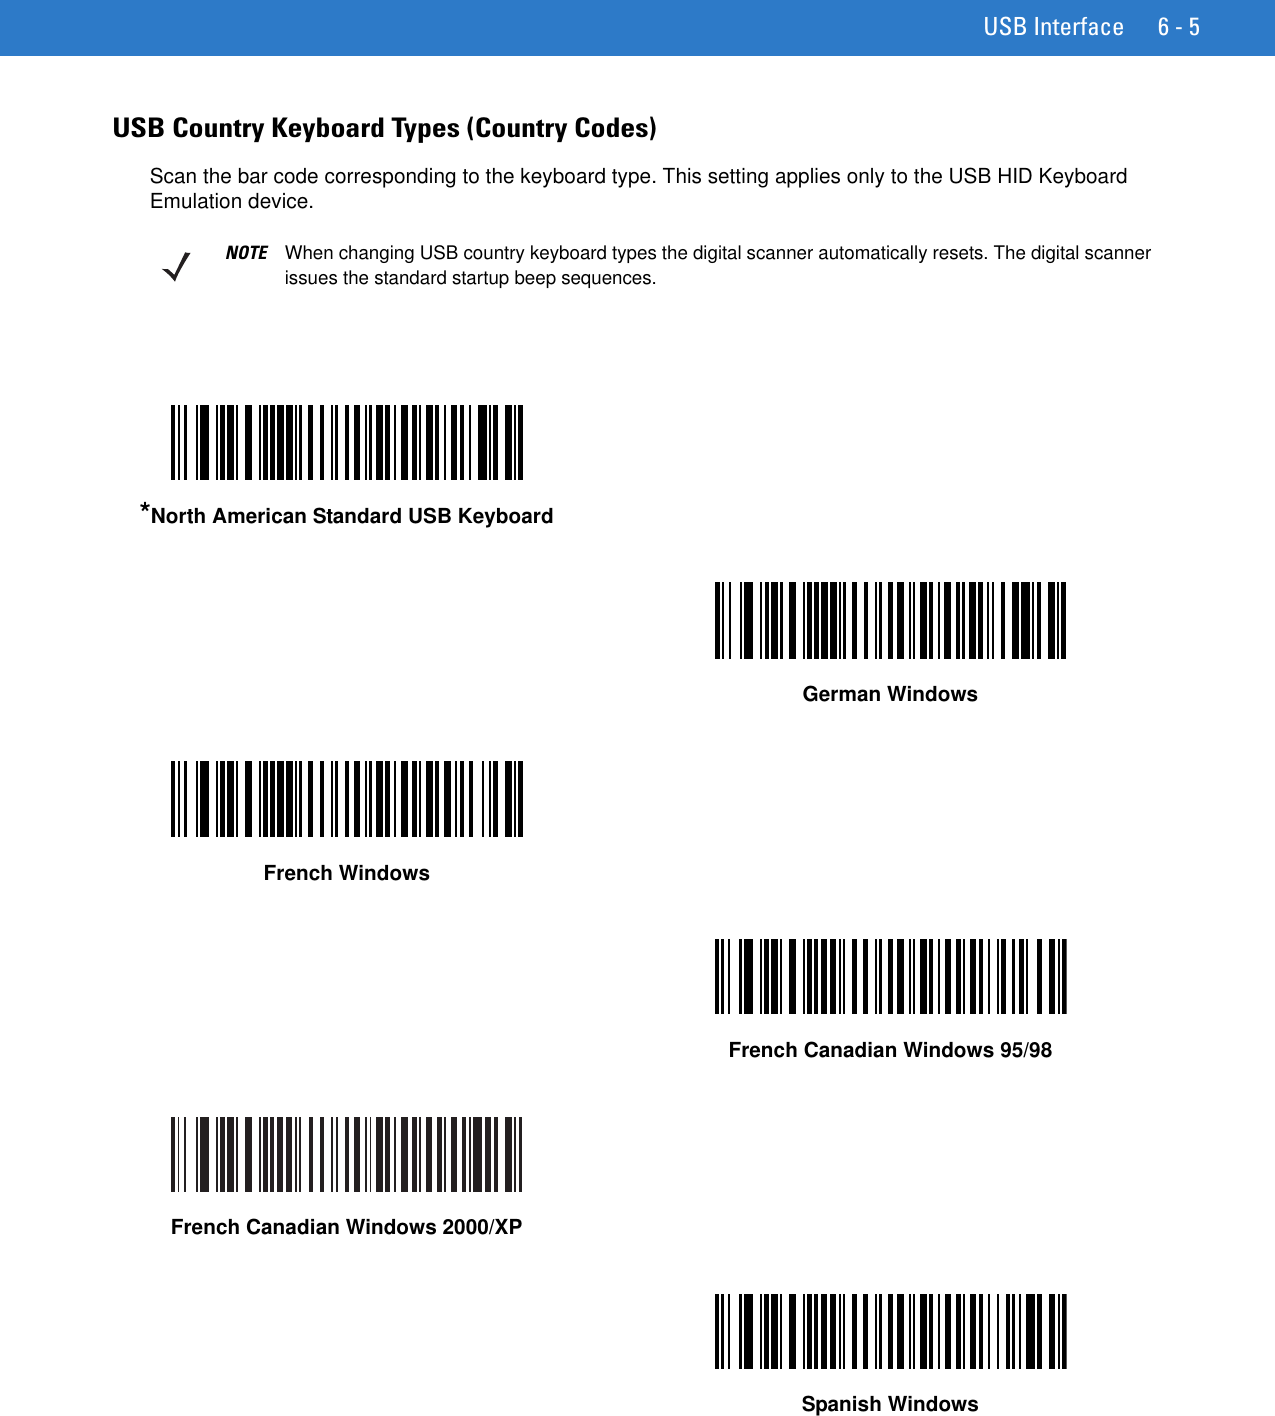 USB Interface 6 - 5USB Country Keyboard Types (Country Codes)Scan the bar code corresponding to the keyboard type. This setting applies only to the USB HID Keyboard Emulation device.NOTE When changing USB country keyboard types the digital scanner automatically resets. The digital scanner issues the standard startup beep sequences.*North American Standard USB KeyboardGerman WindowsFrench WindowsFrench Canadian Windows 95/98French Canadian Windows 2000/XPSpanish Windows